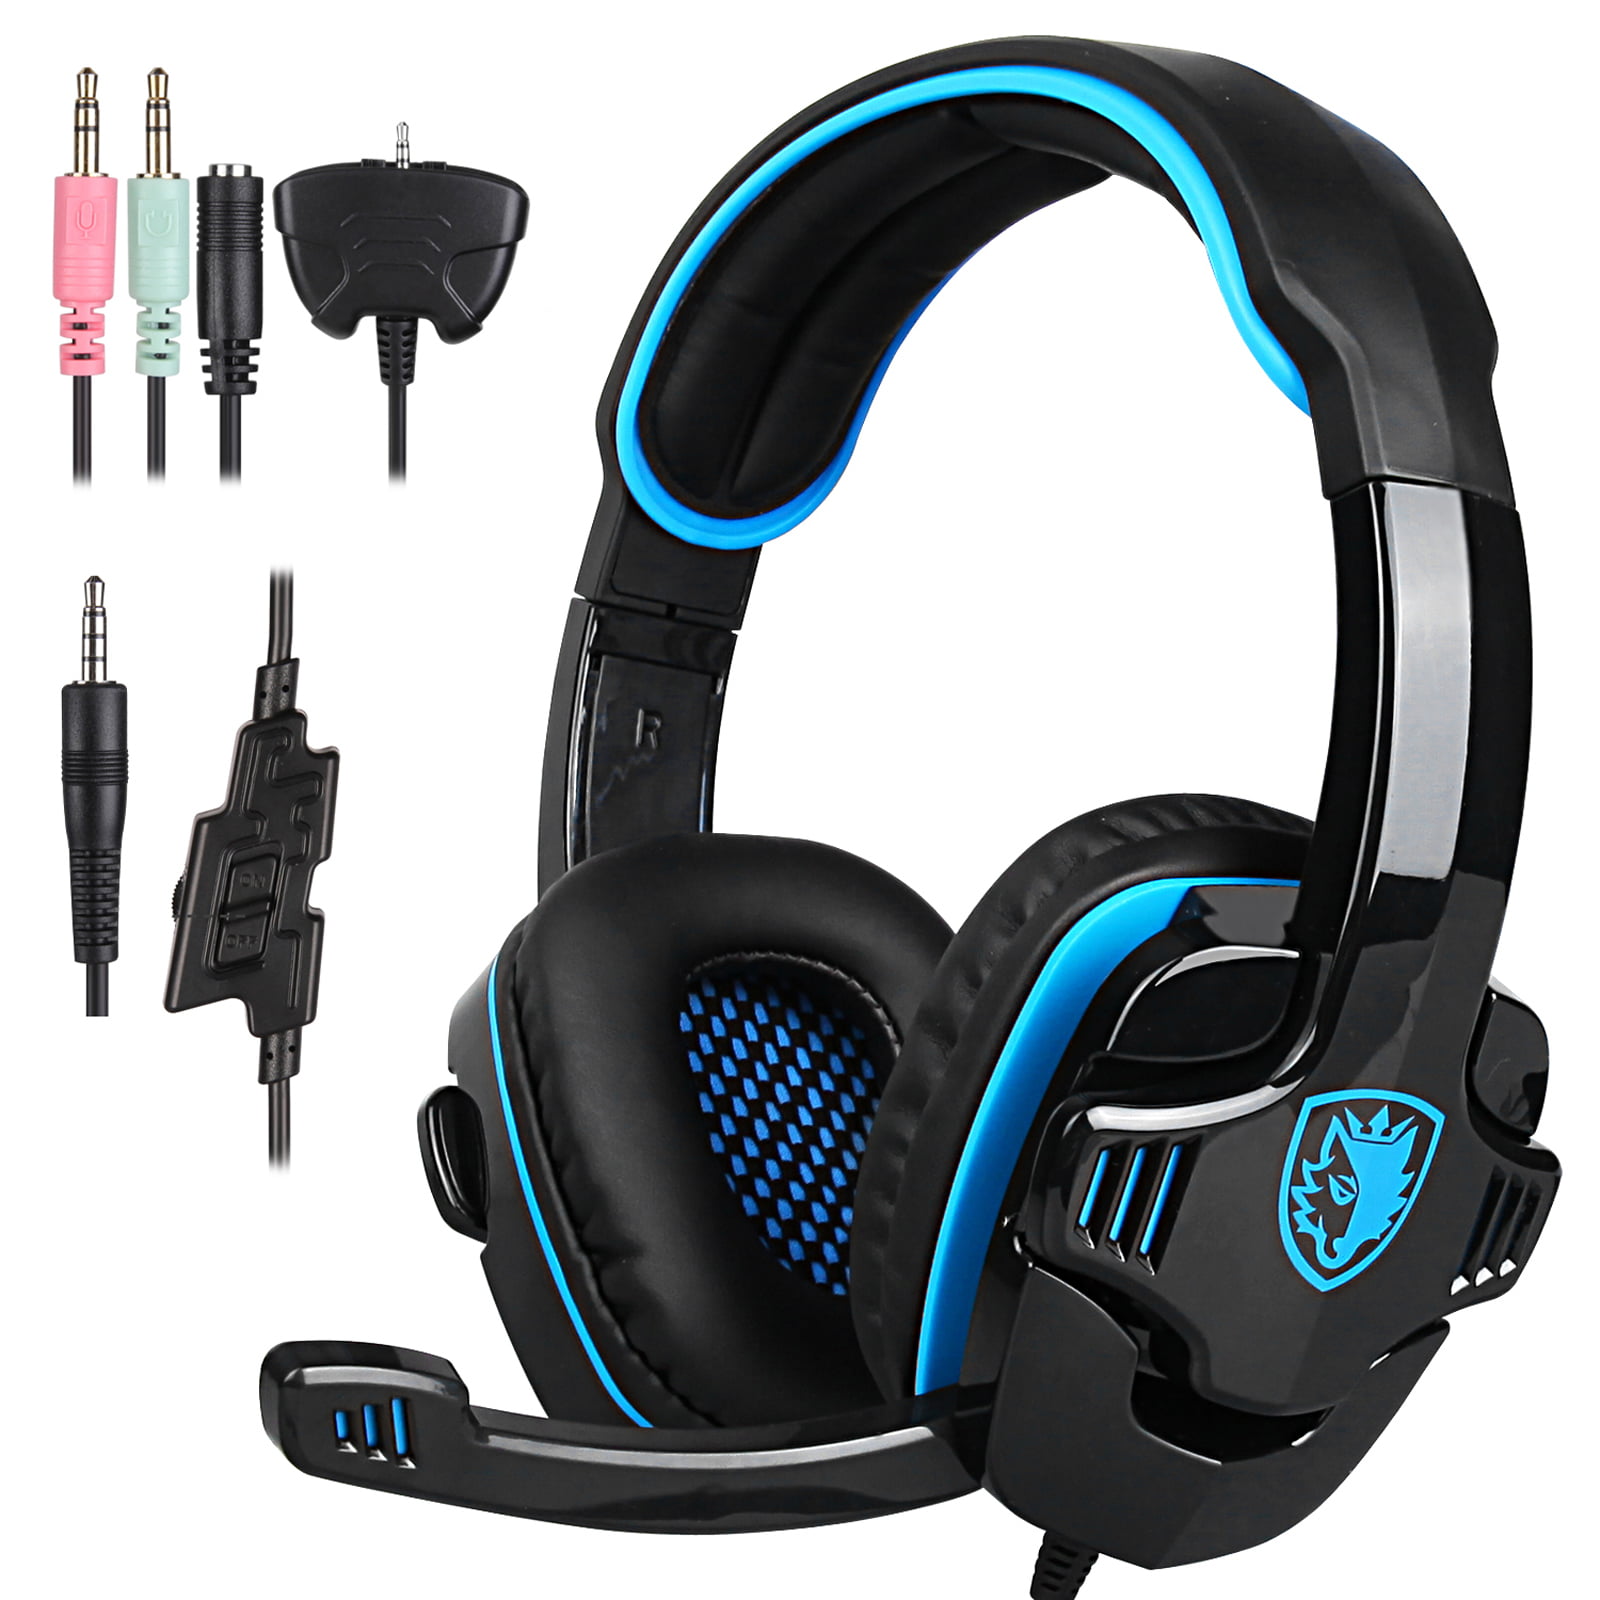 Black Wired Gaming Headset Game Headphone Microphone Headband with Mic Stereo Bass 3.5mm for PC Computer Playstation 4 PS4 